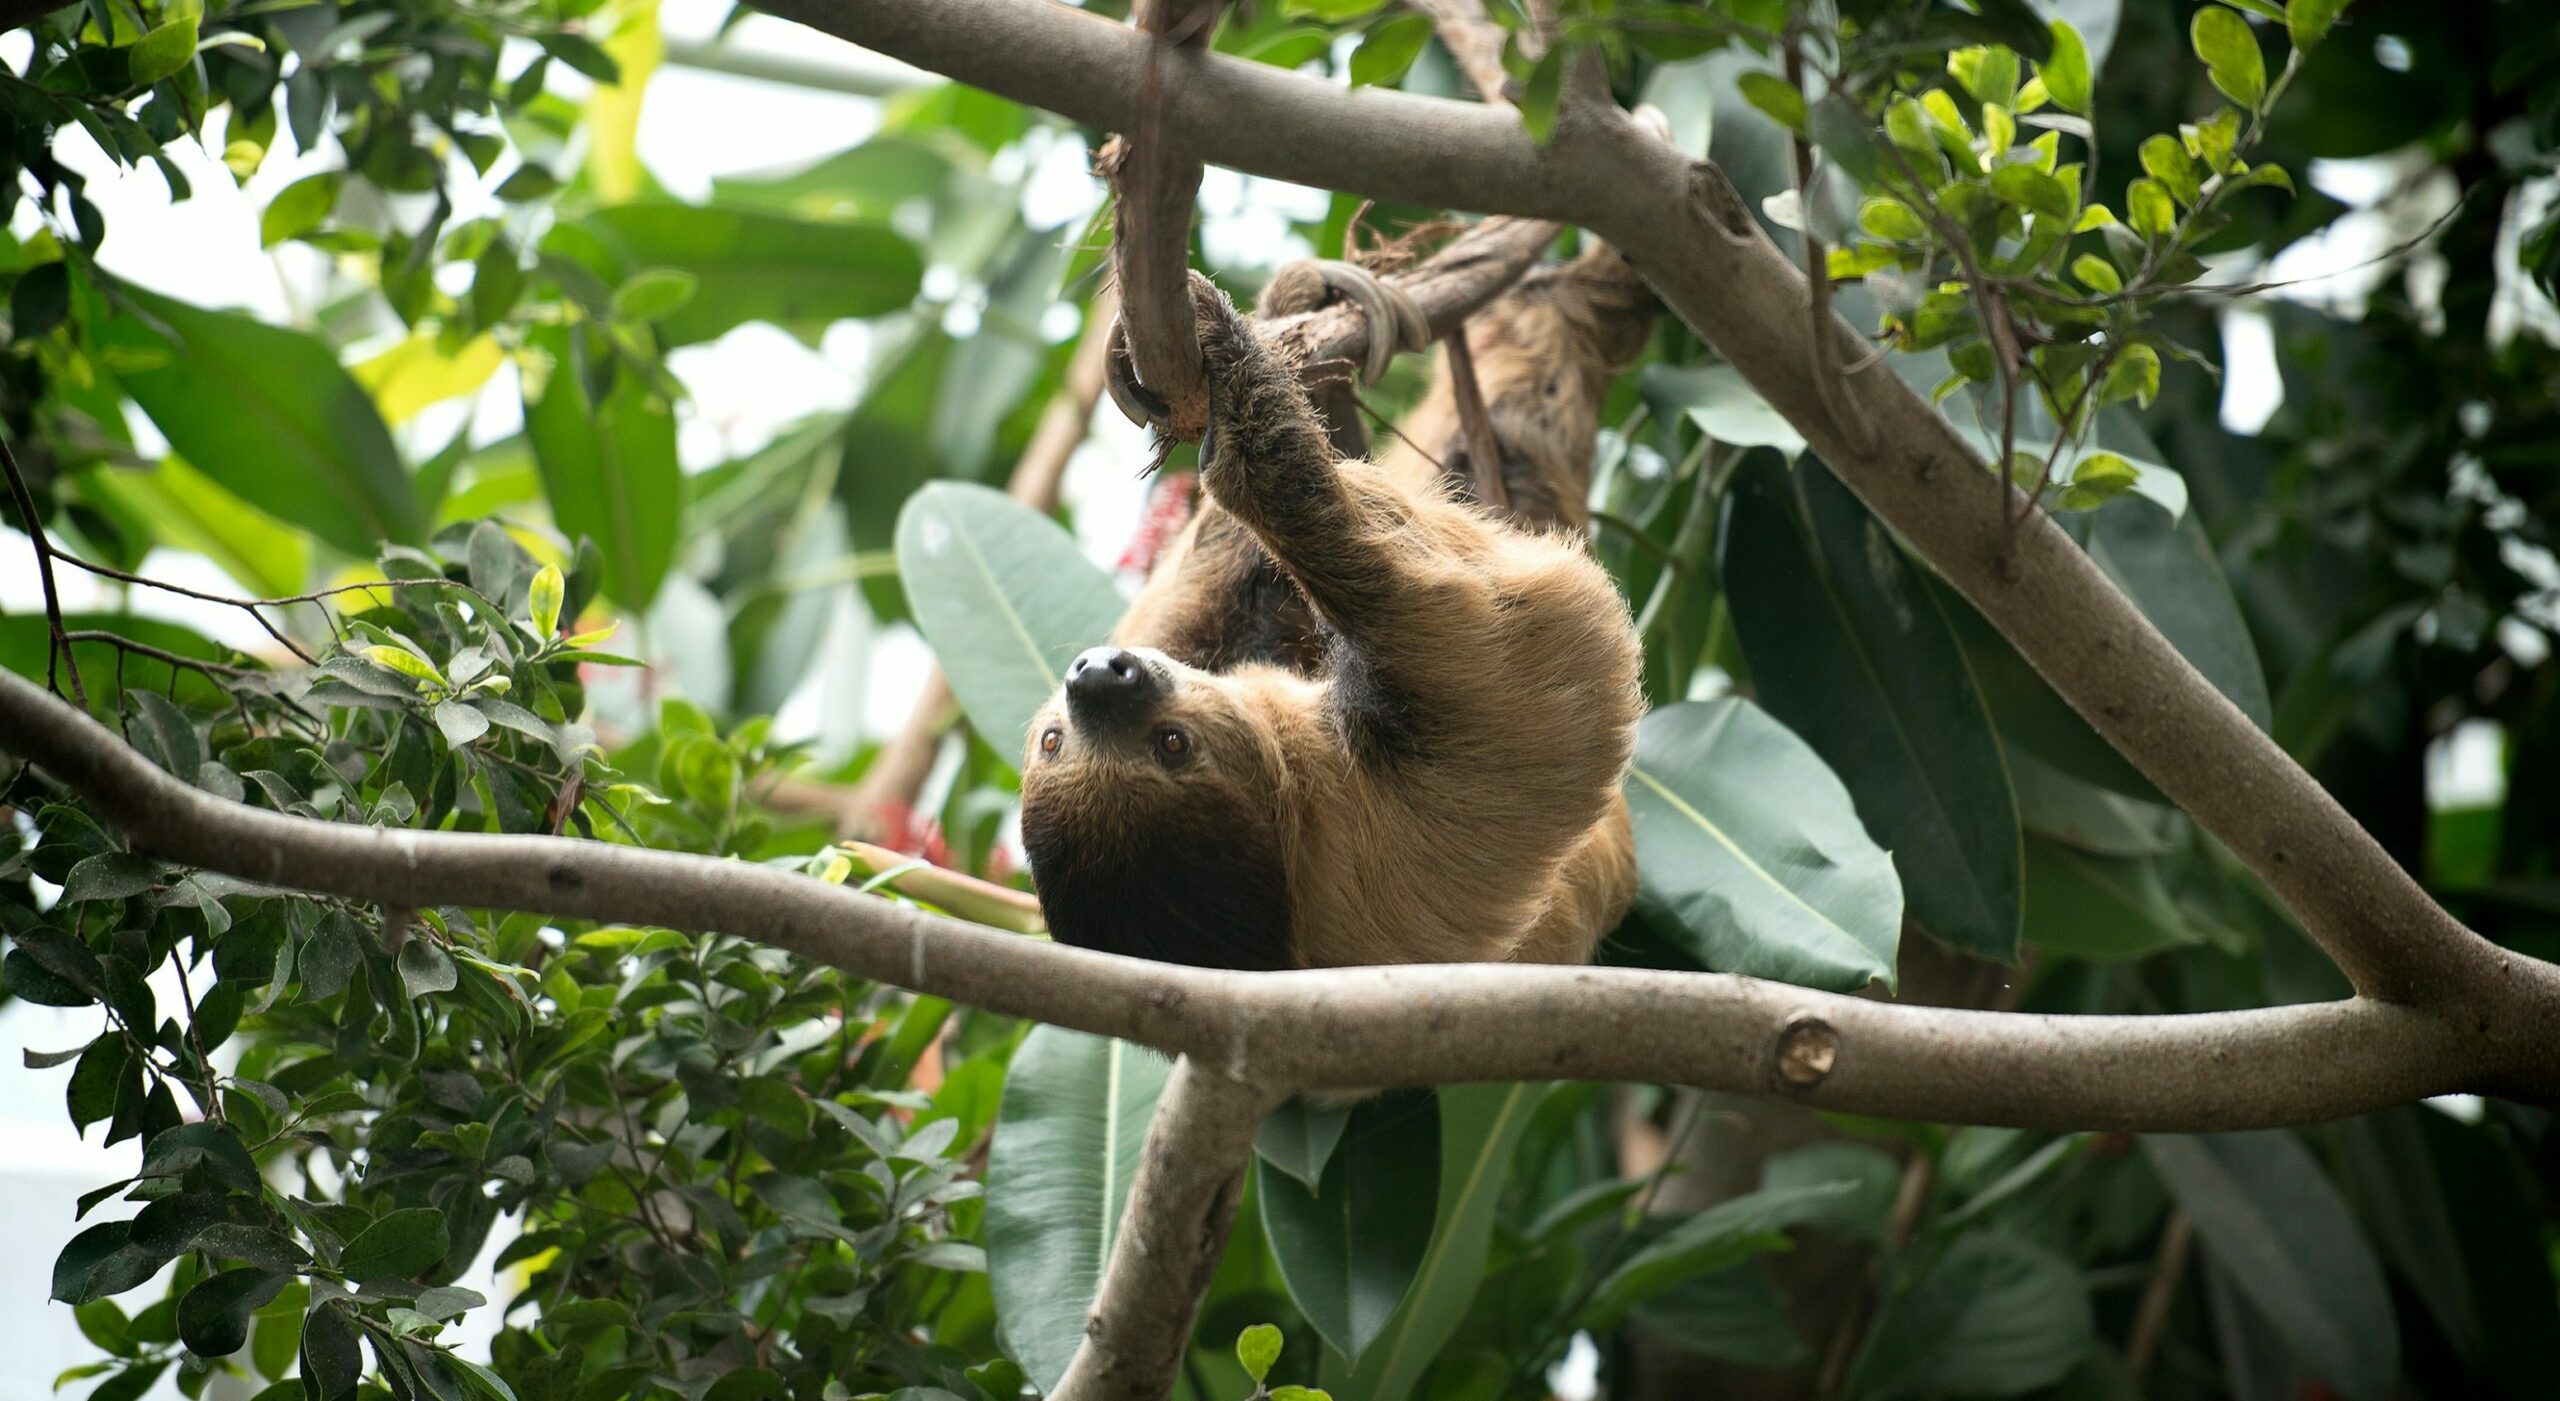 A Linnaeus's Two-toed Sloth hanging upside down on a branch